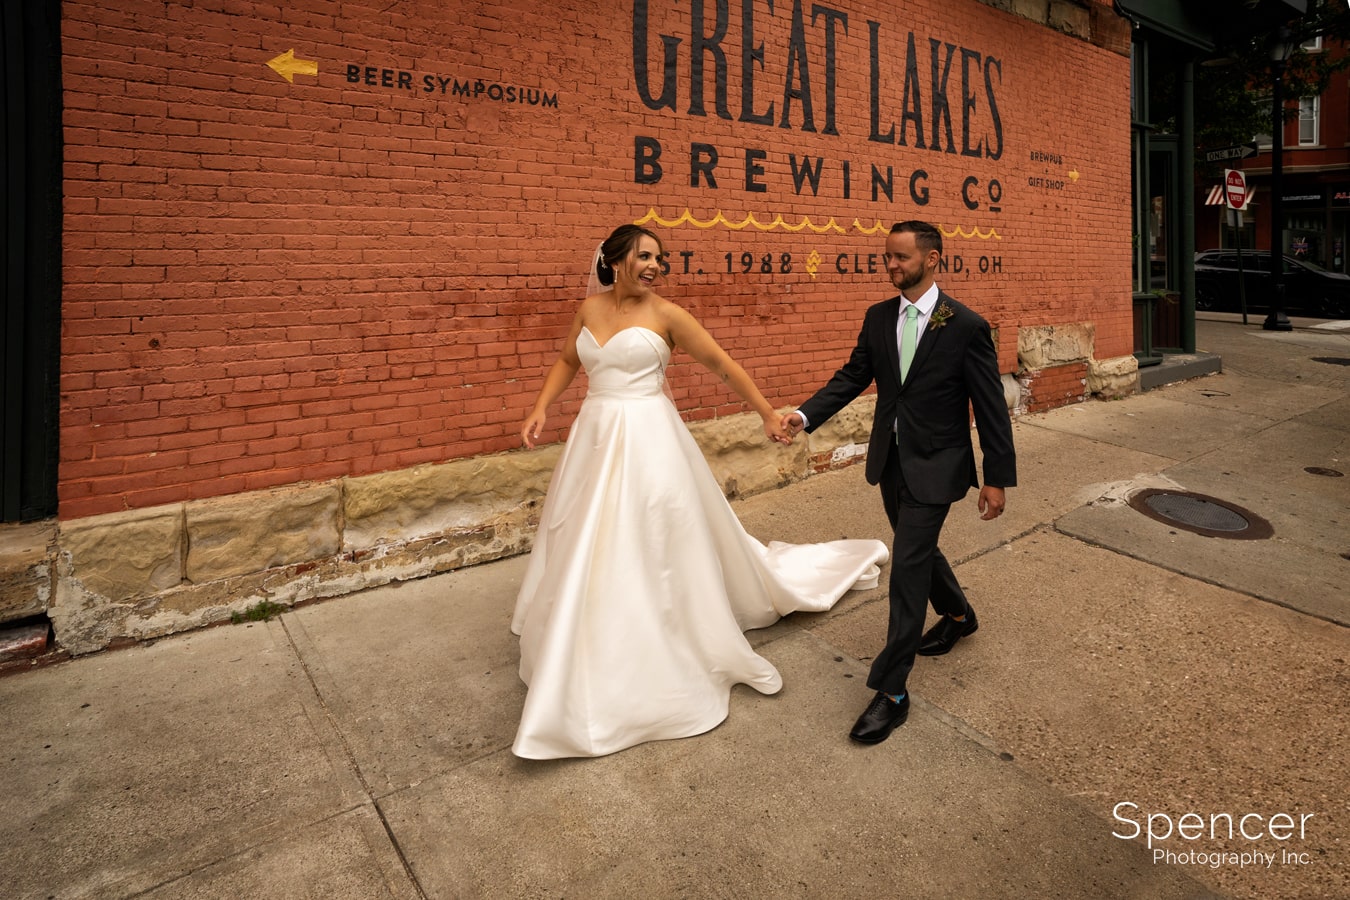 You are currently viewing Ryan & Katelyn’s Wedding & Reception at Great Lakes Brewing Company